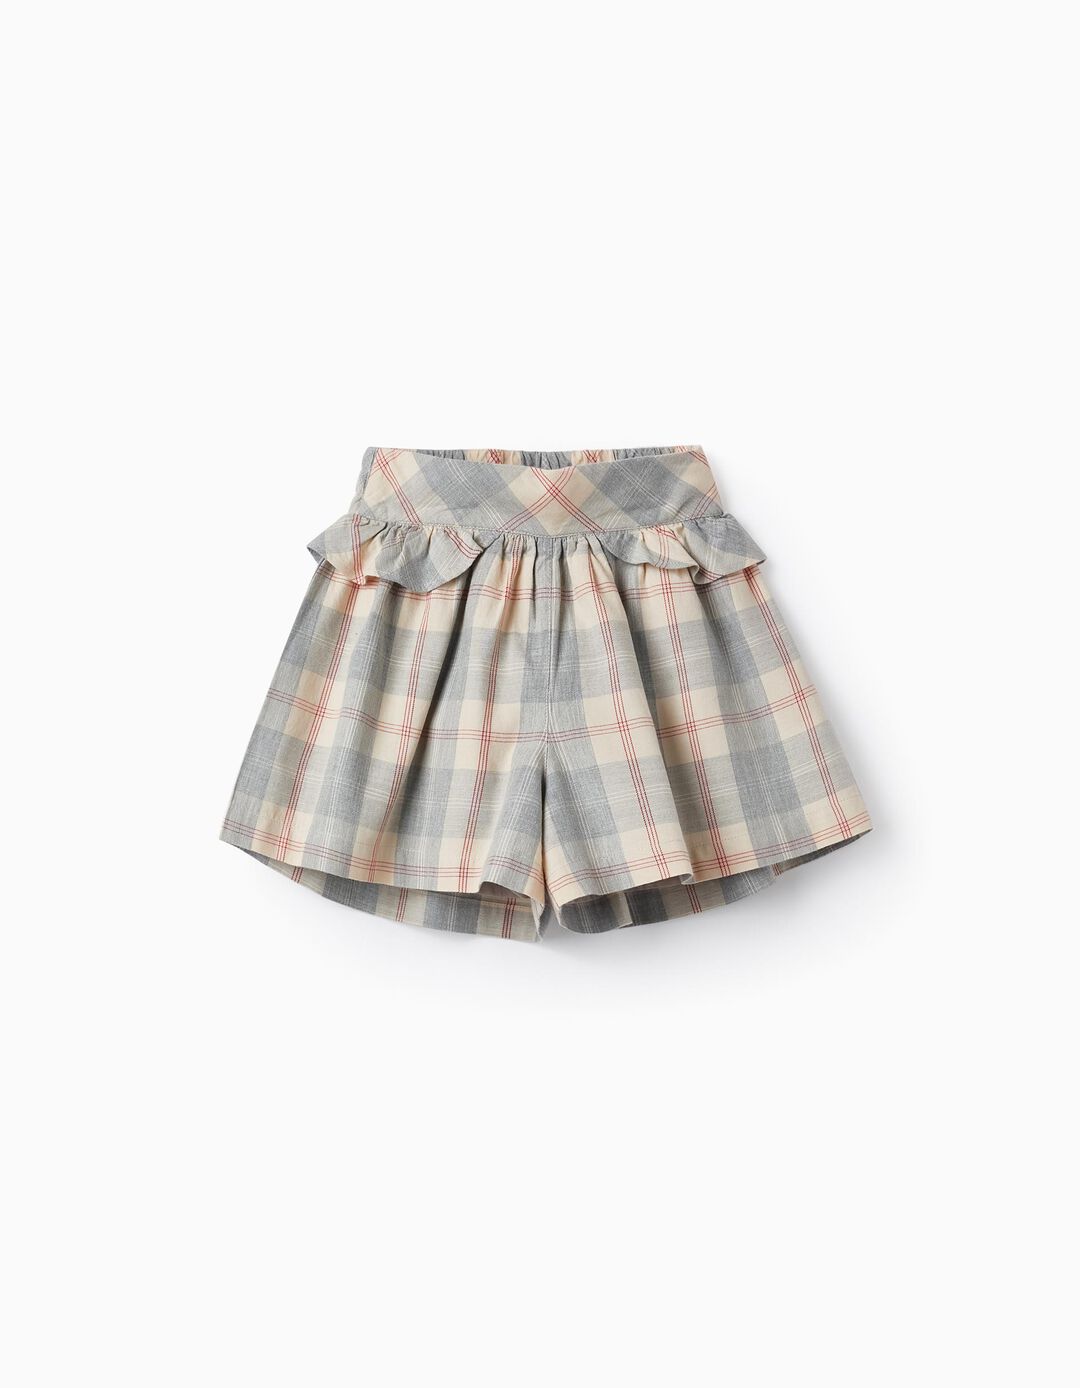 Checkered Shorts with Ruffles for Girls 'B&S', Grey/Beige